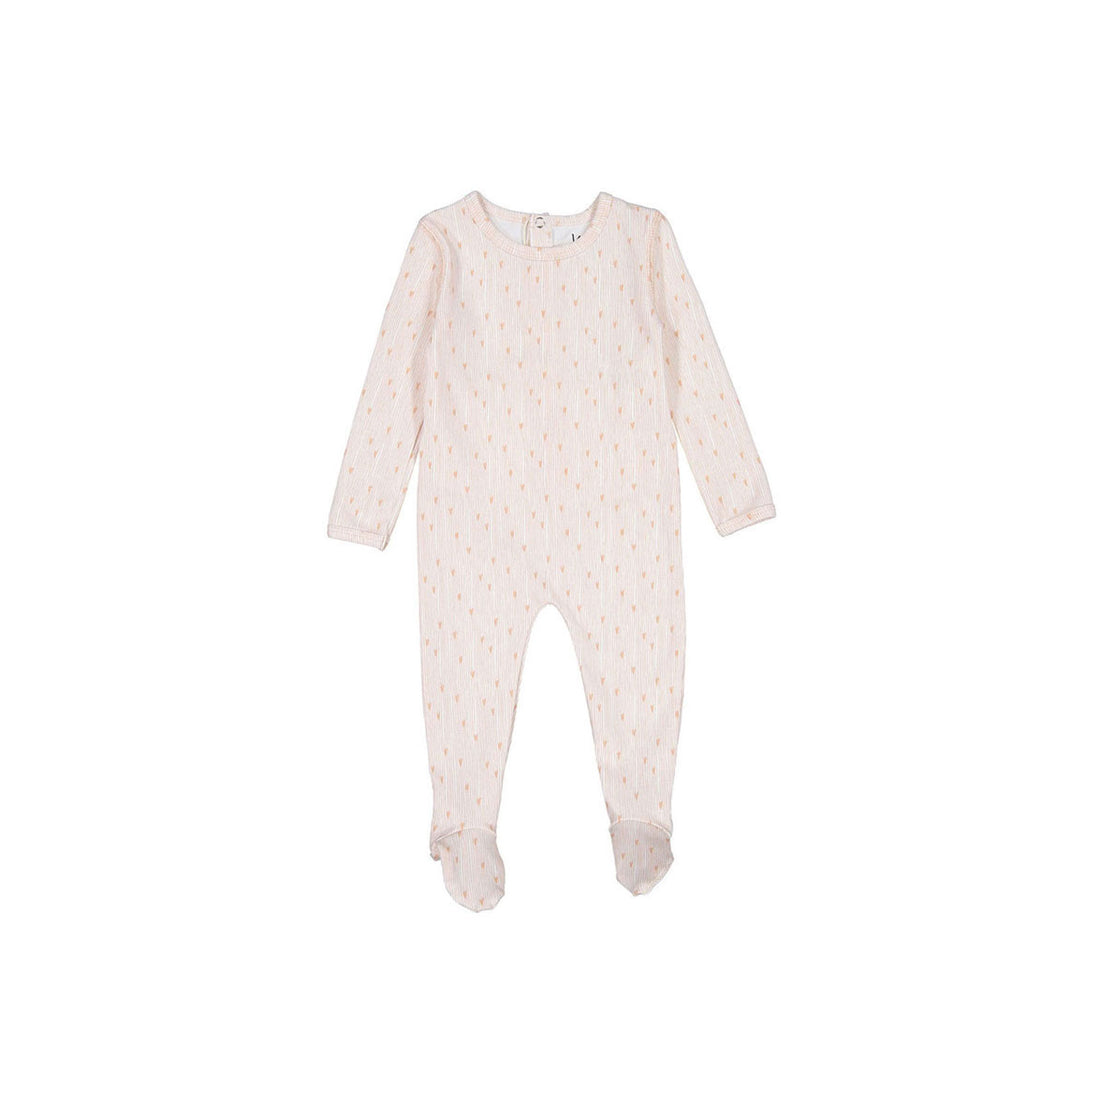 Ladida Layette Heart Print Footie